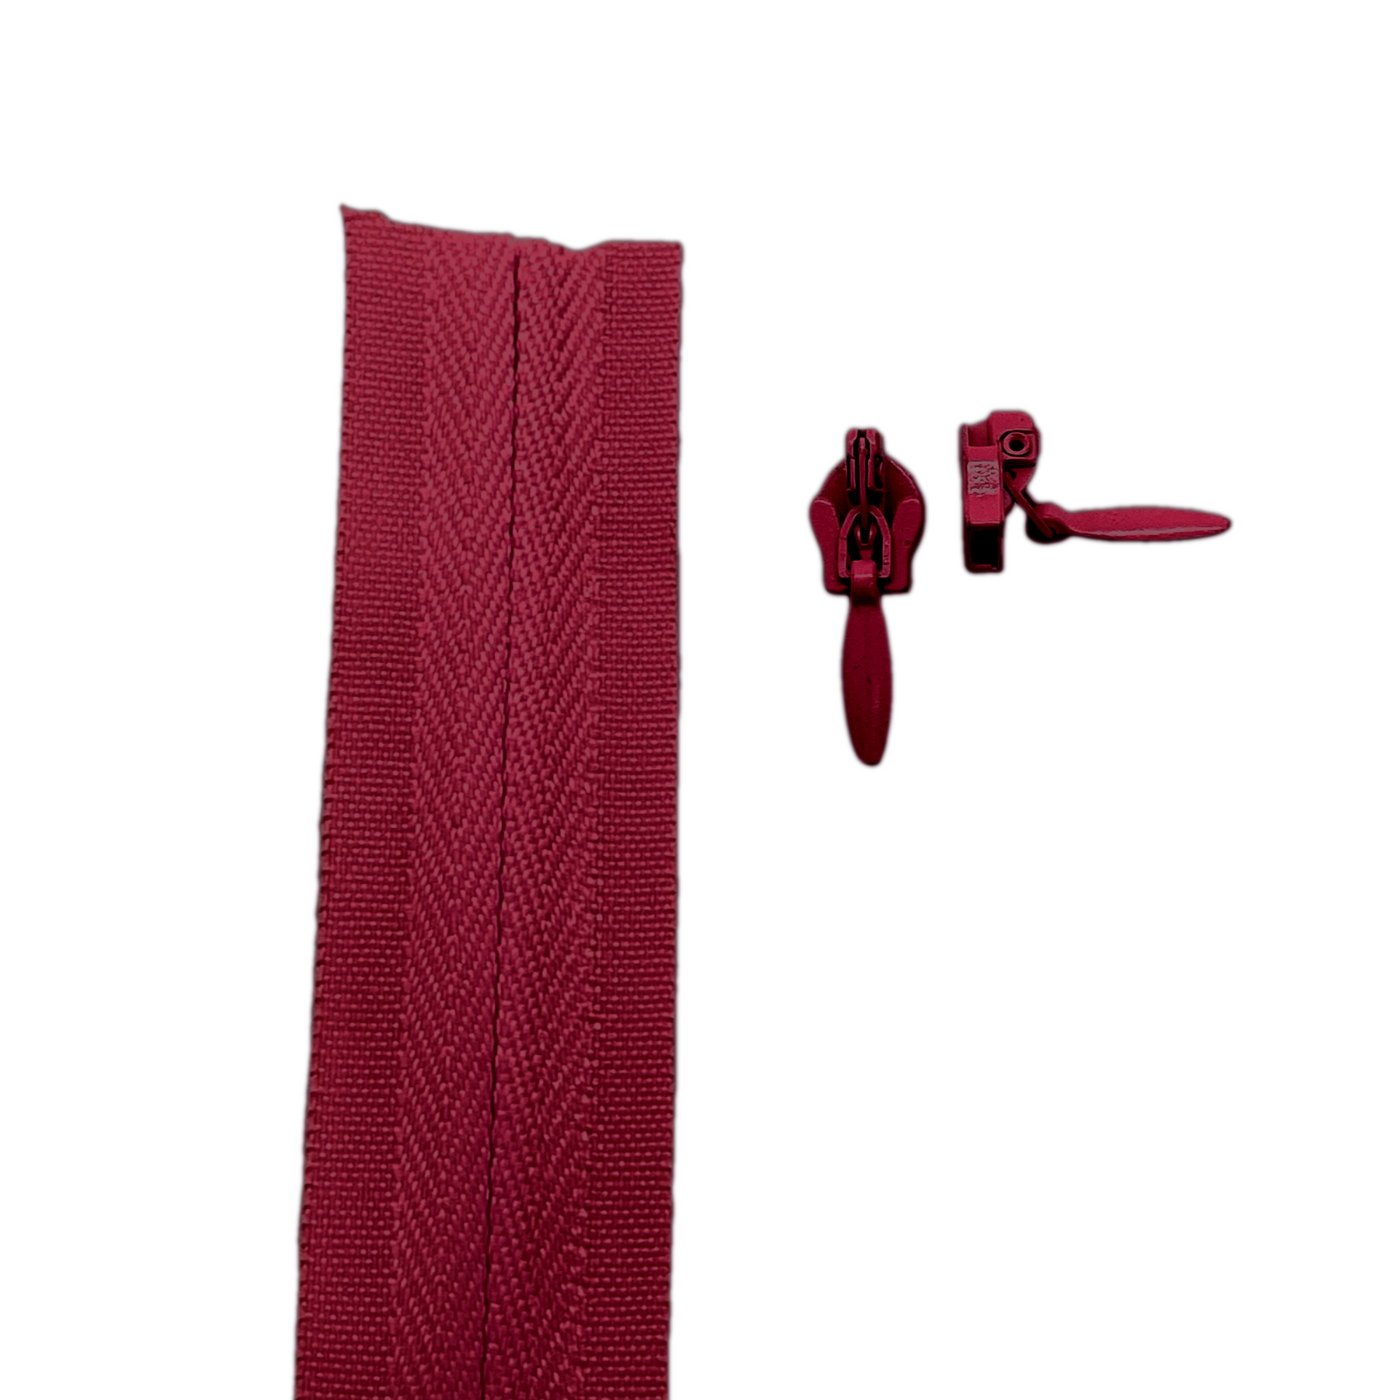 red wine burgundy Invisible continuous zipper roll in long chain style with sliders of 2 per metre